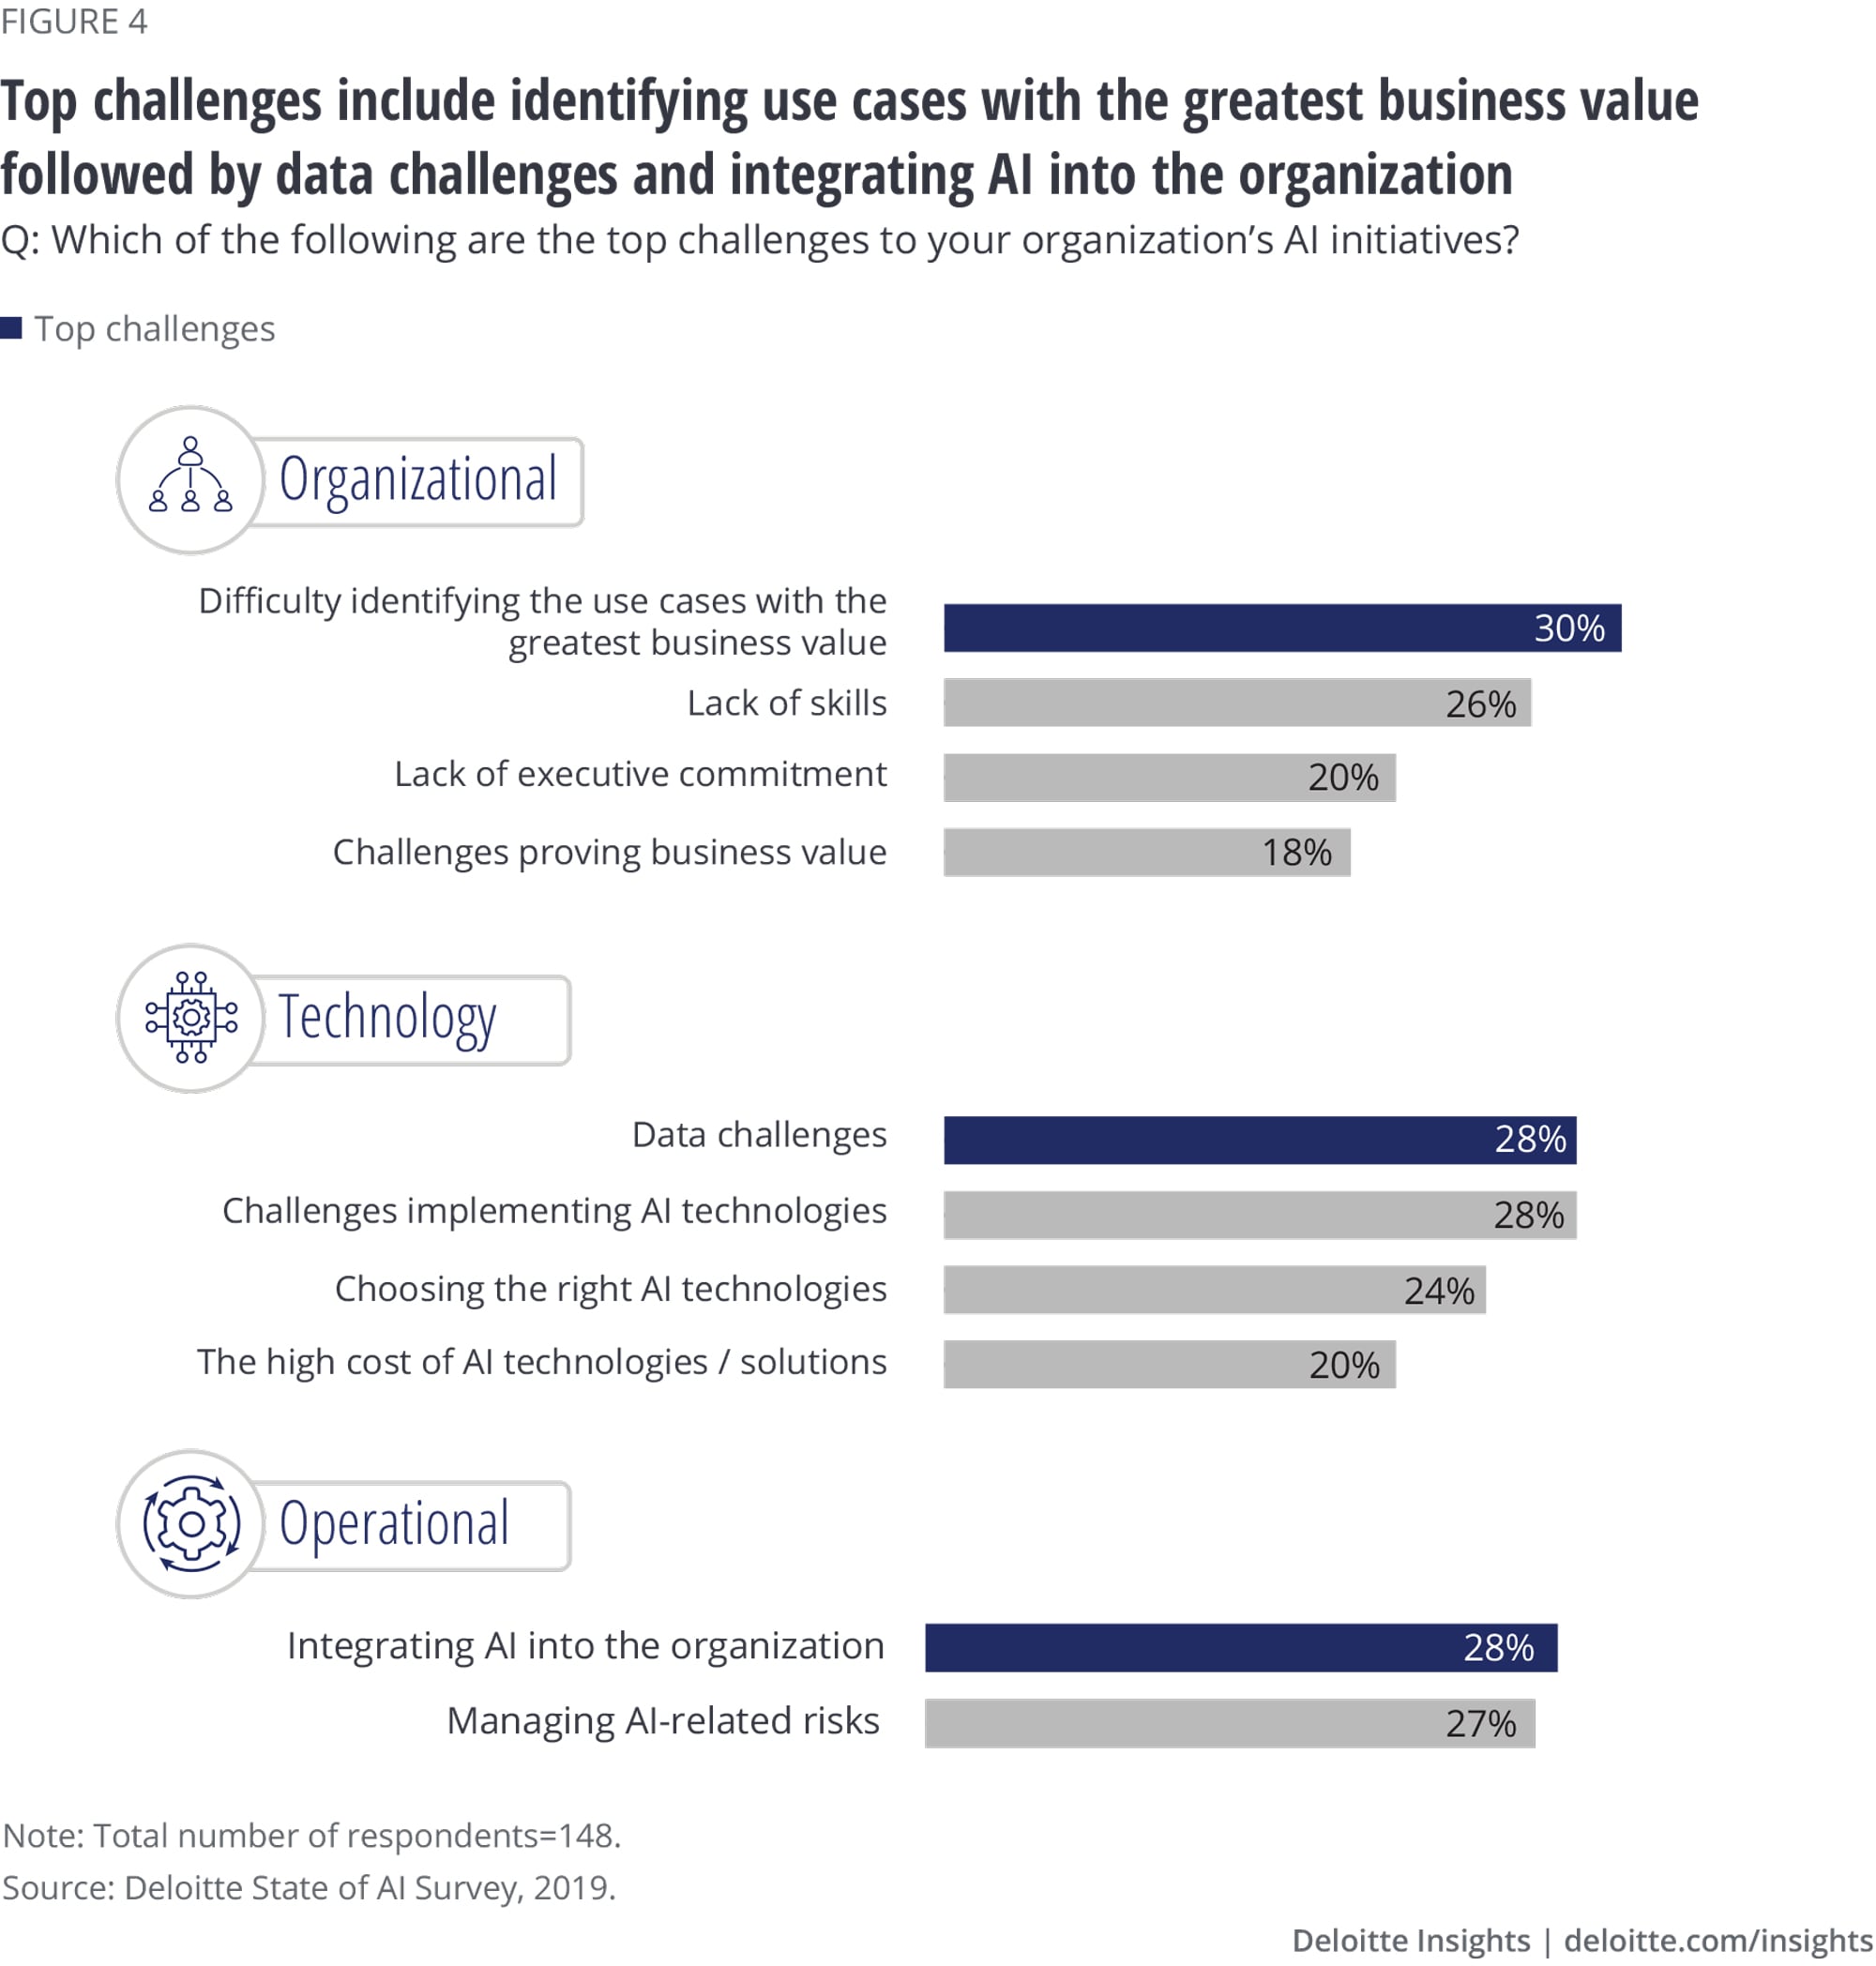 Identifying use cases with the greatest business value followed by data challenges and integrating AI into the organization are top challenges